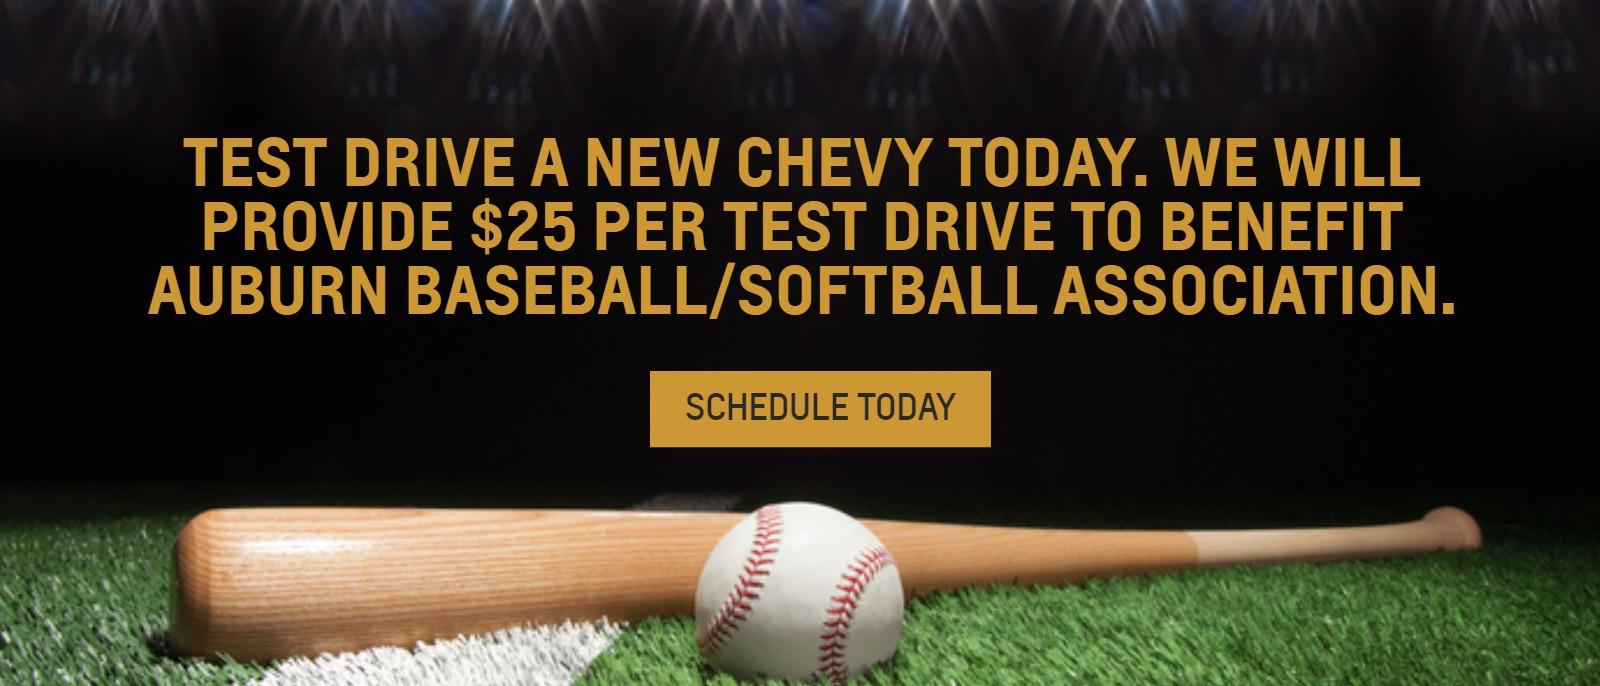 Test Drive a new Chevy today. We will provide $25 per test drive to benefit Auburn Baseball/Softball Association.